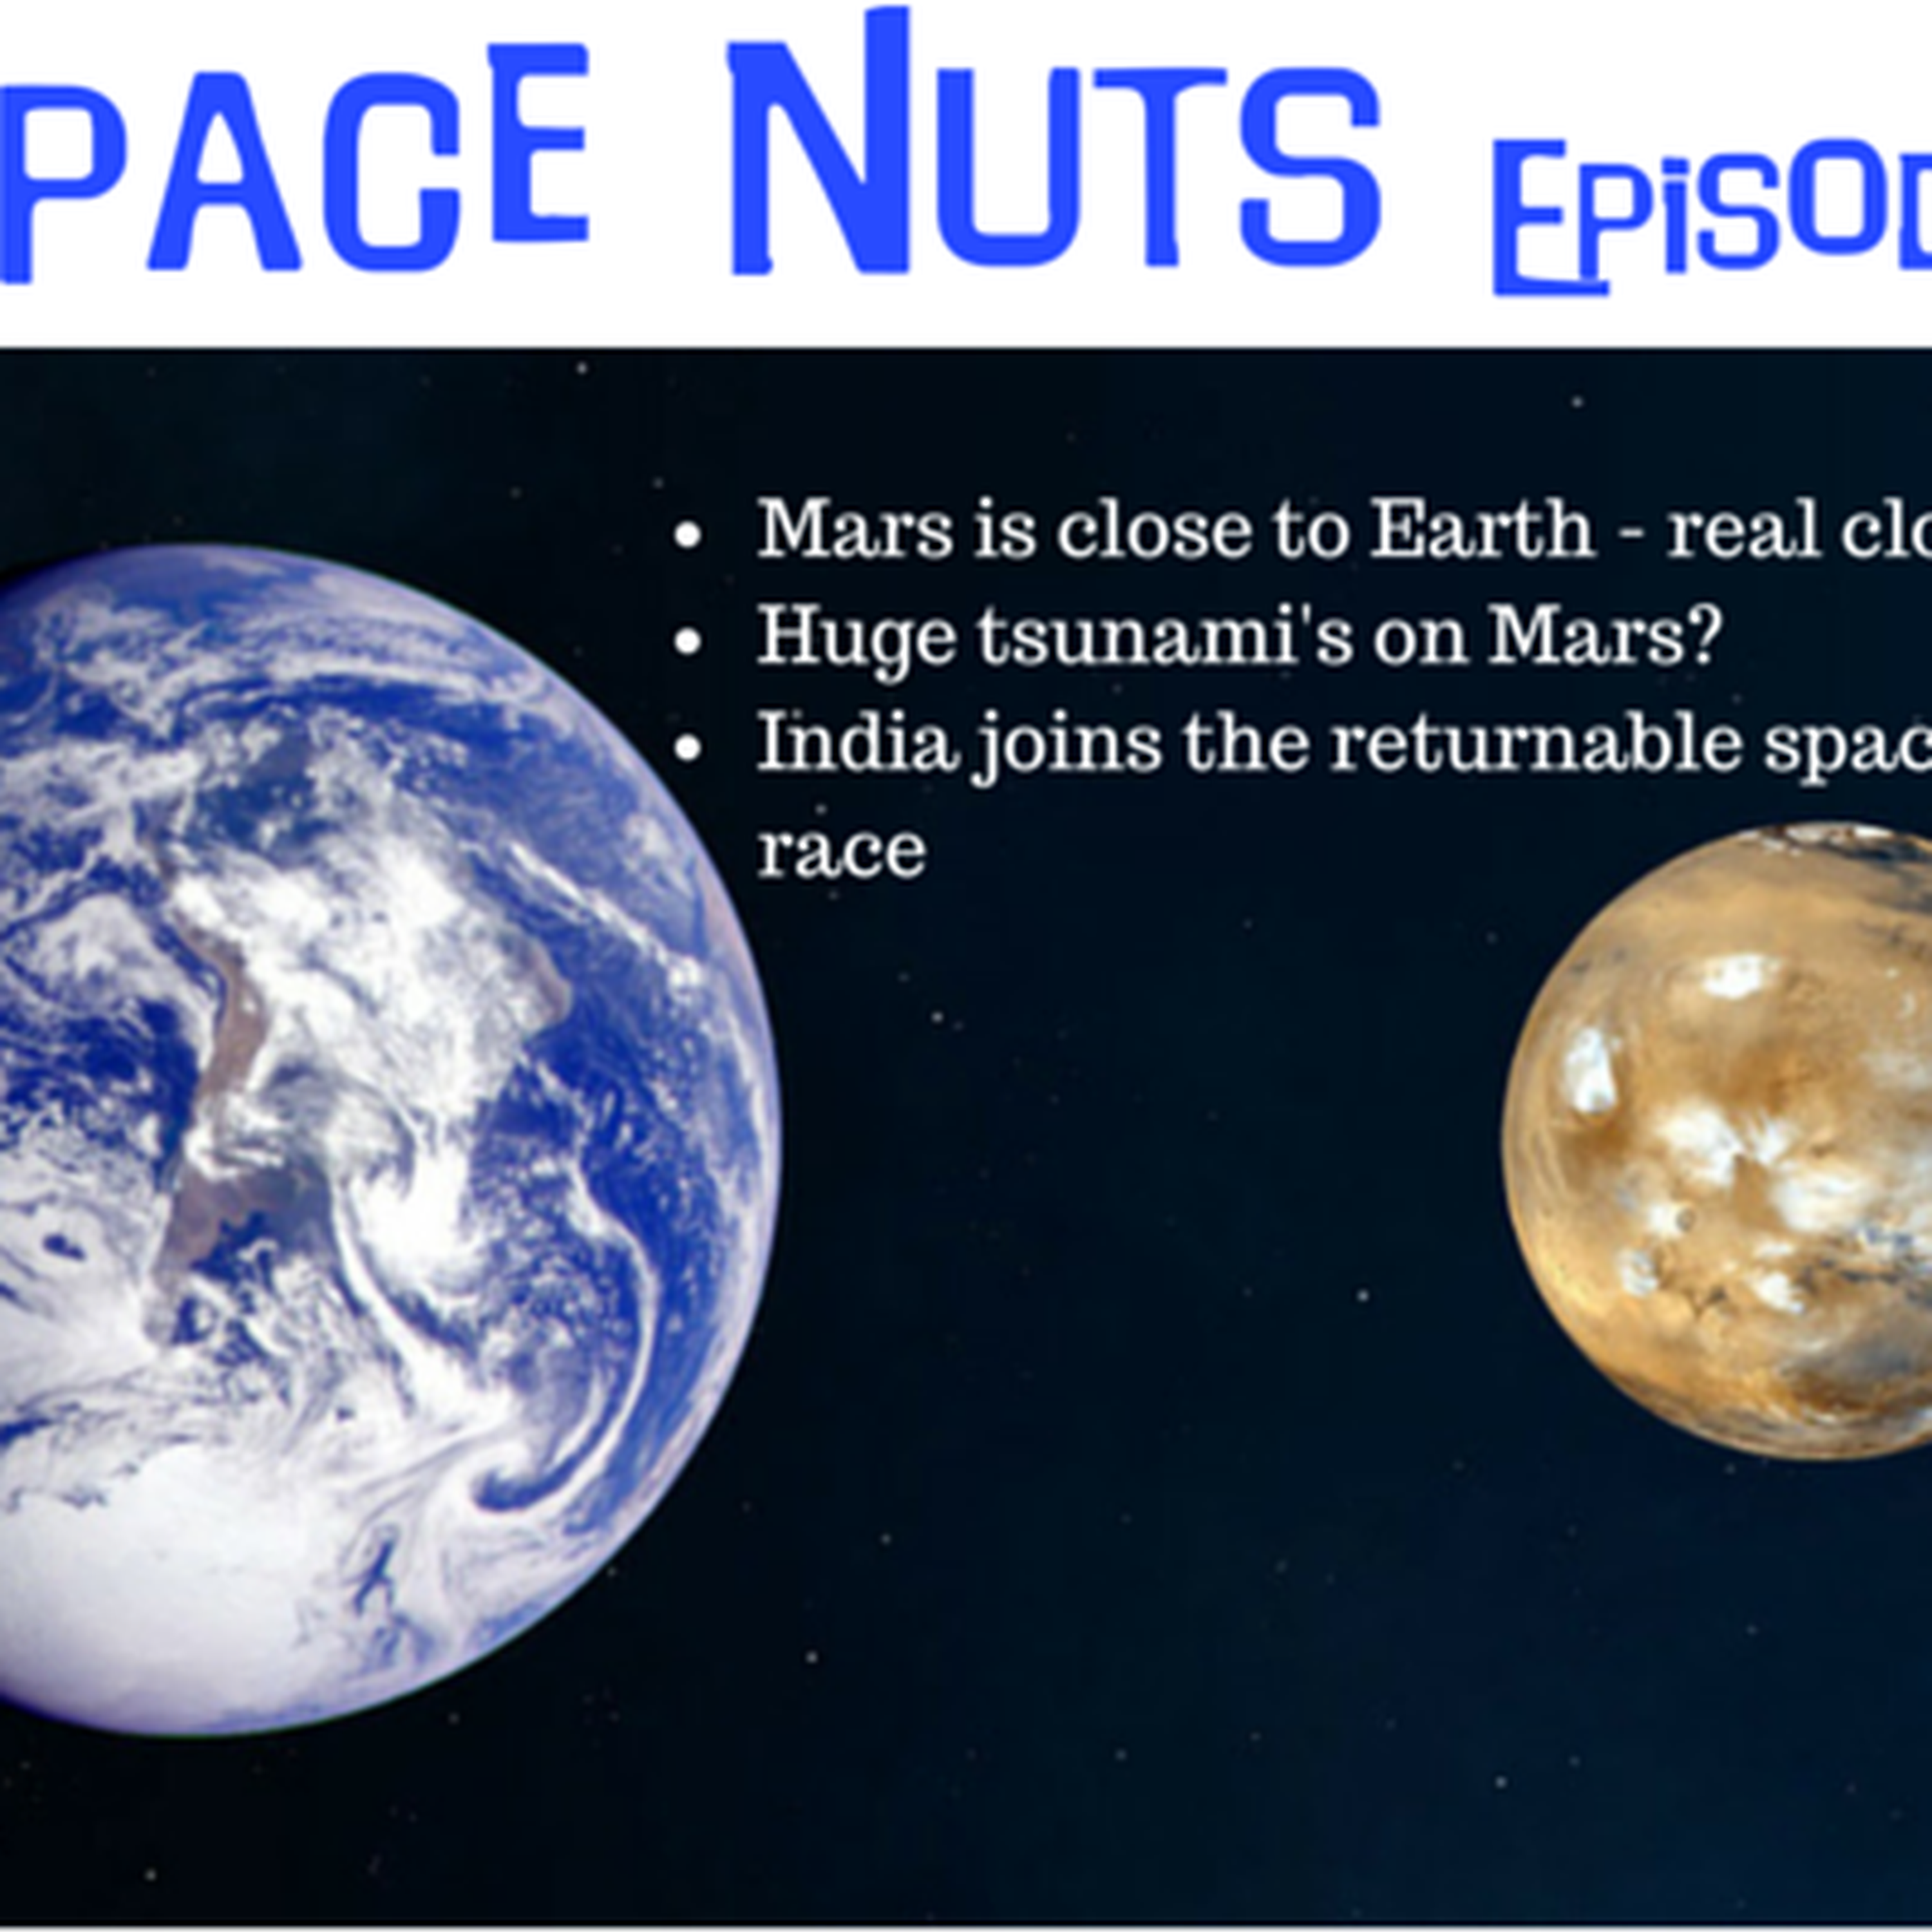 20: Space Nuts Episode 19 - Mars is close...real close...